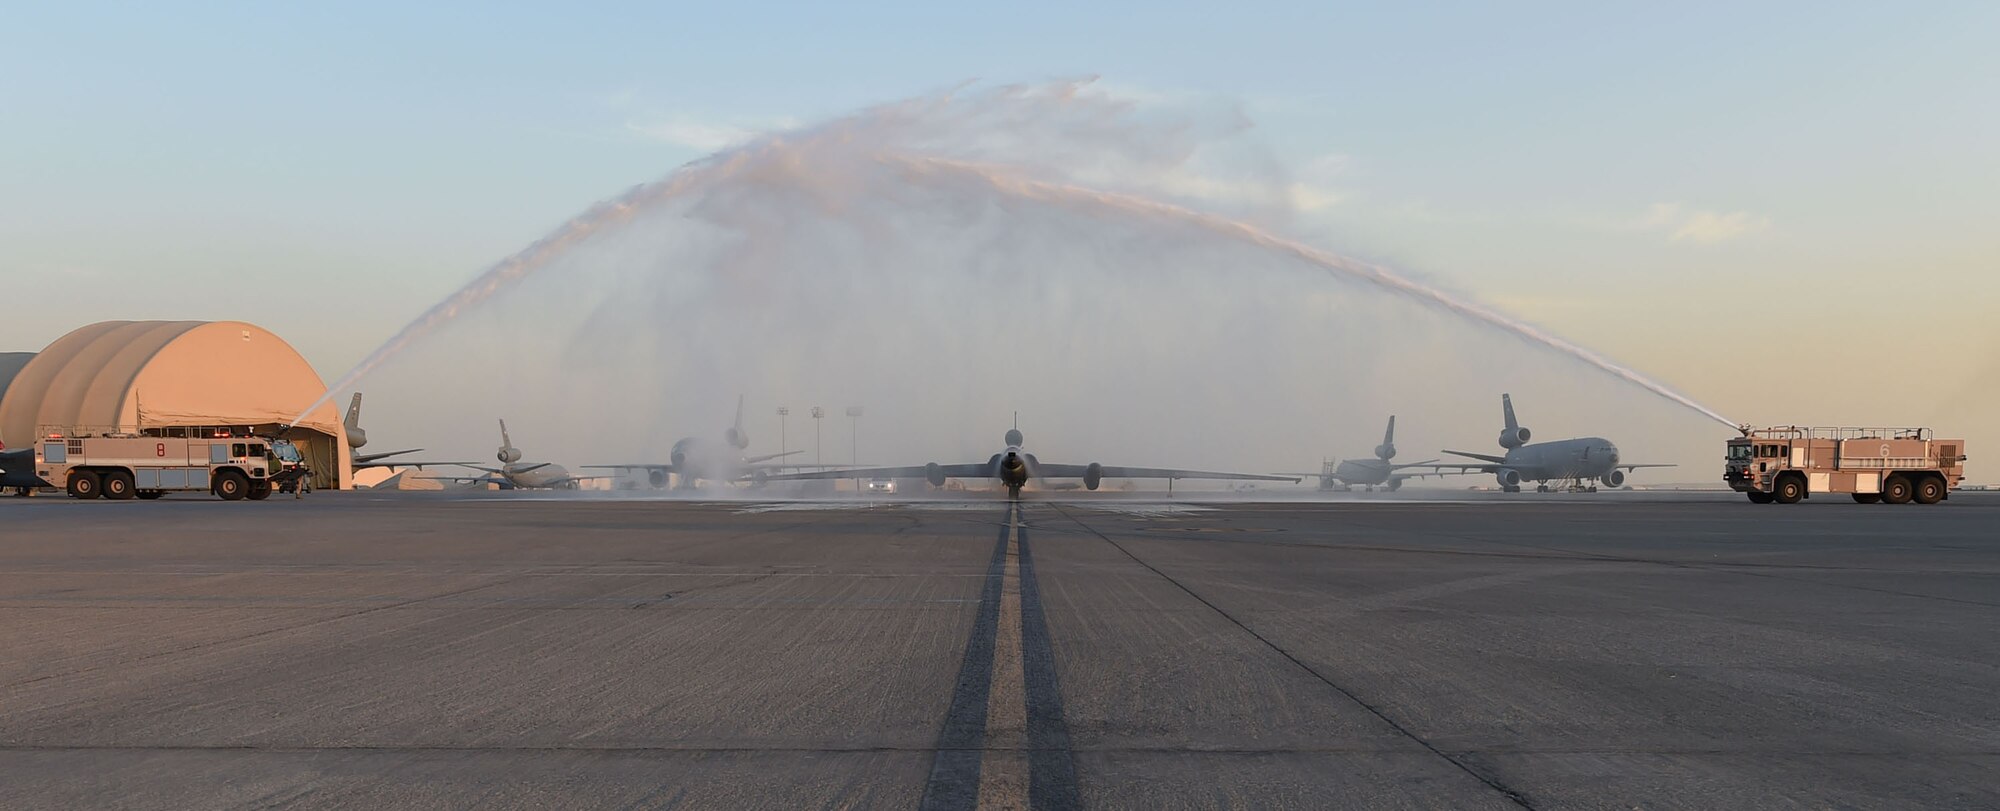 After the final sortie for one of the U-2 mission systems the aircraft passes under a water shower, a traditional way of celebrating major milestones or final flights, provided by the 380th Expeditionary Civil Engineering Squadron Fire Department at an undisclosed location in Southwest Asia, Dec. 15, 2016. A system that is already in use on the RQ-4 will replace the retired system, enabling both aircraft to continue providing complimentary high-altitude intelligence, surveillance and reconnaissance products. (U.S. Air Force photo by Tech. Sgt. Christopher Carwile)